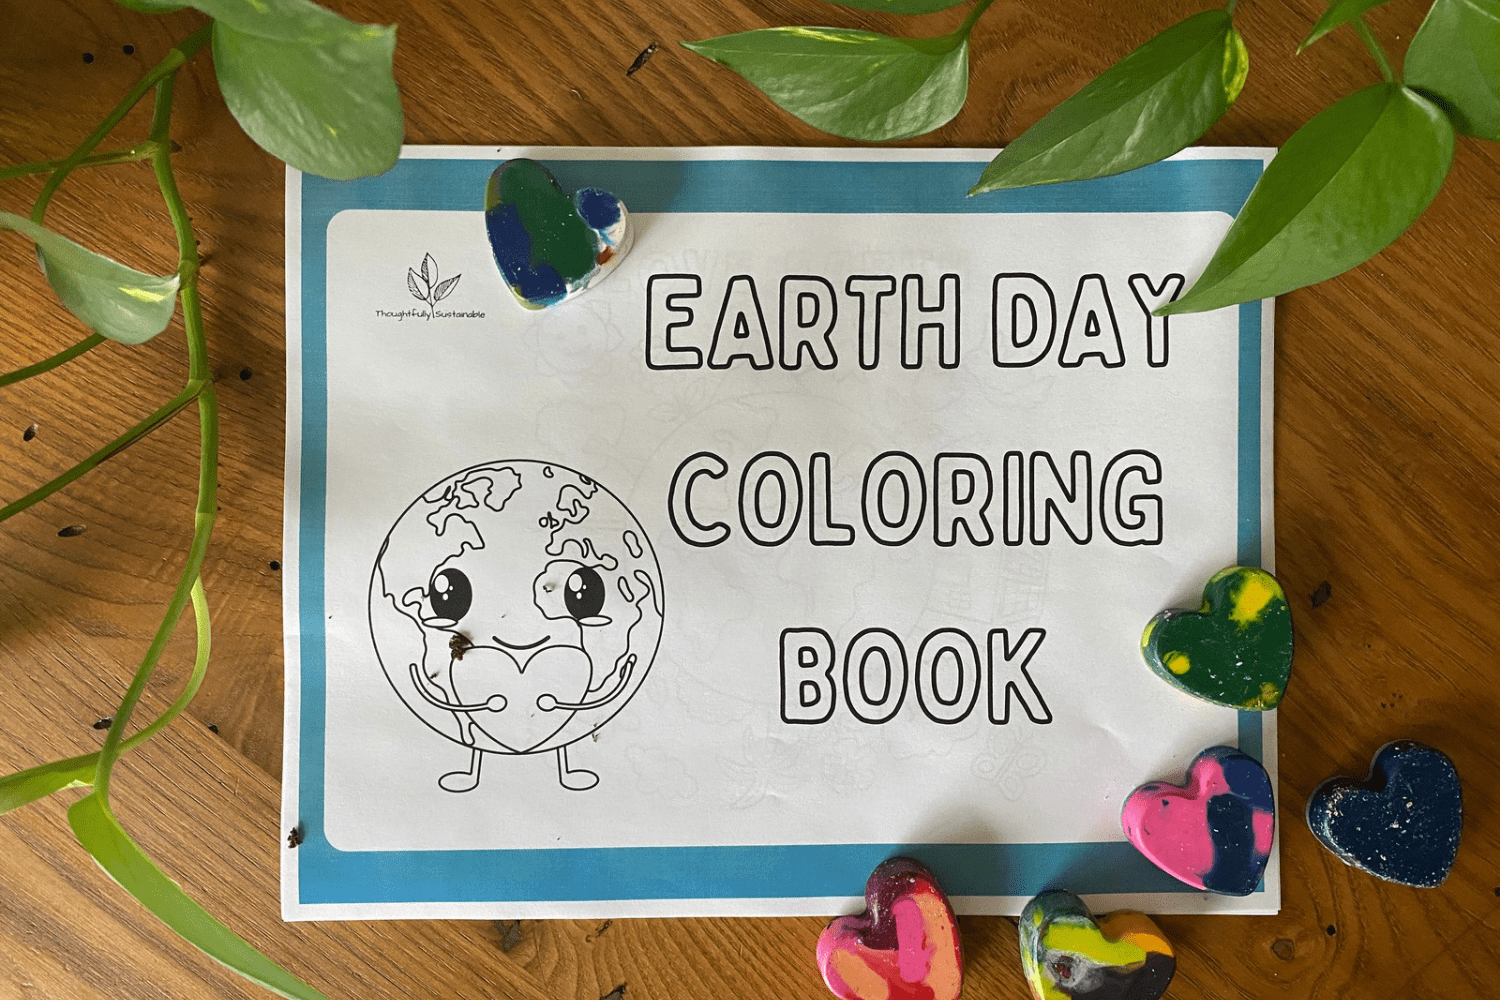 Earth Day Coloring Book sits on a wooden table with a green plant and some upcycled heart crayons